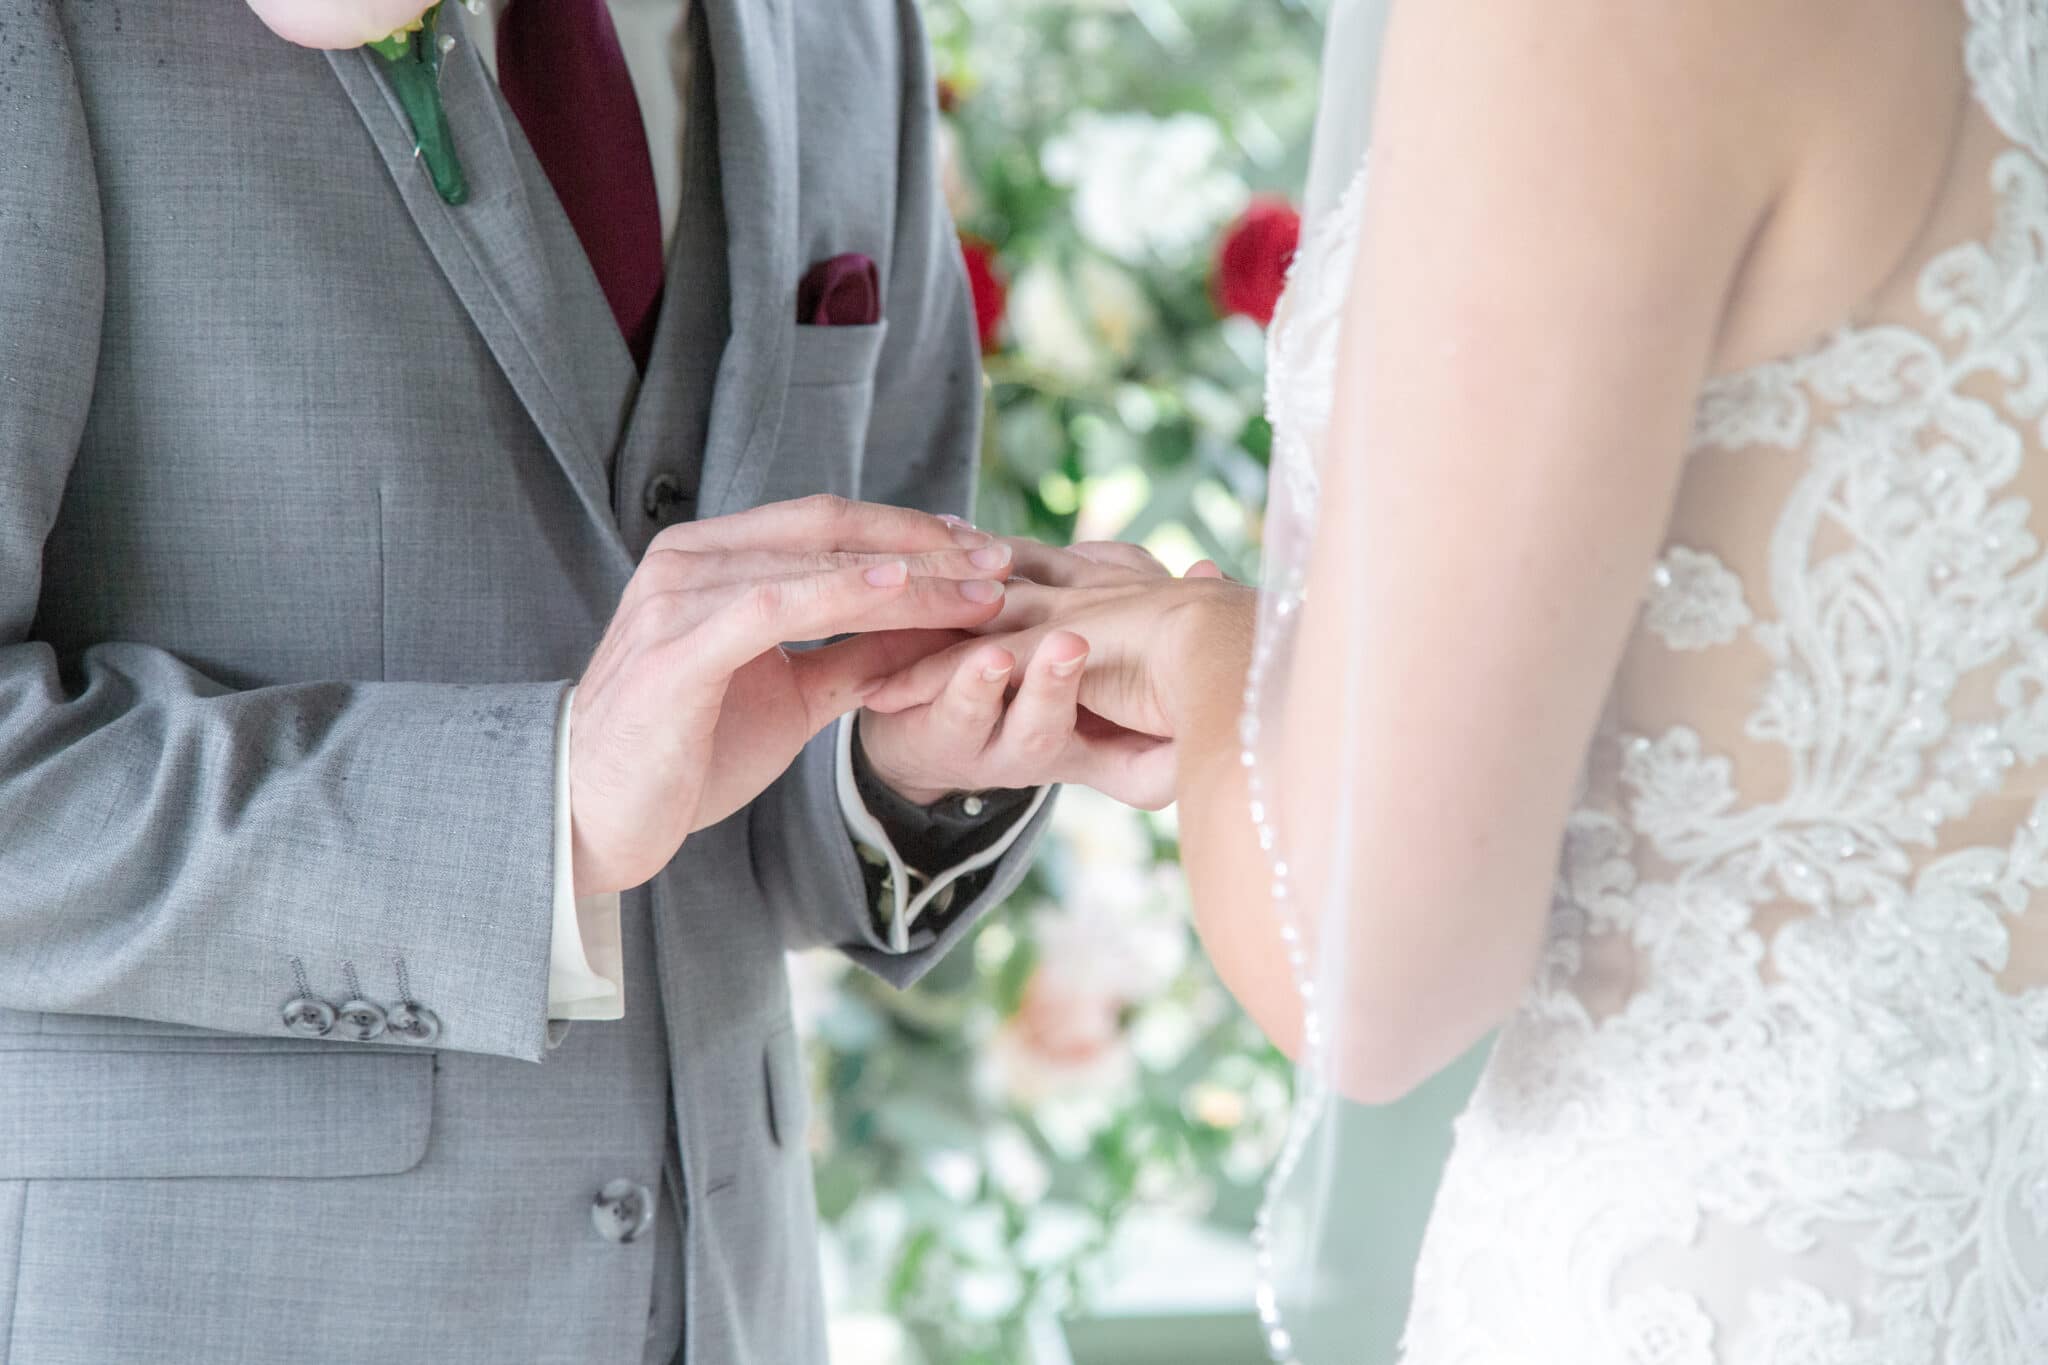 groom placing the wedding band on brides hand at wedding ceremony